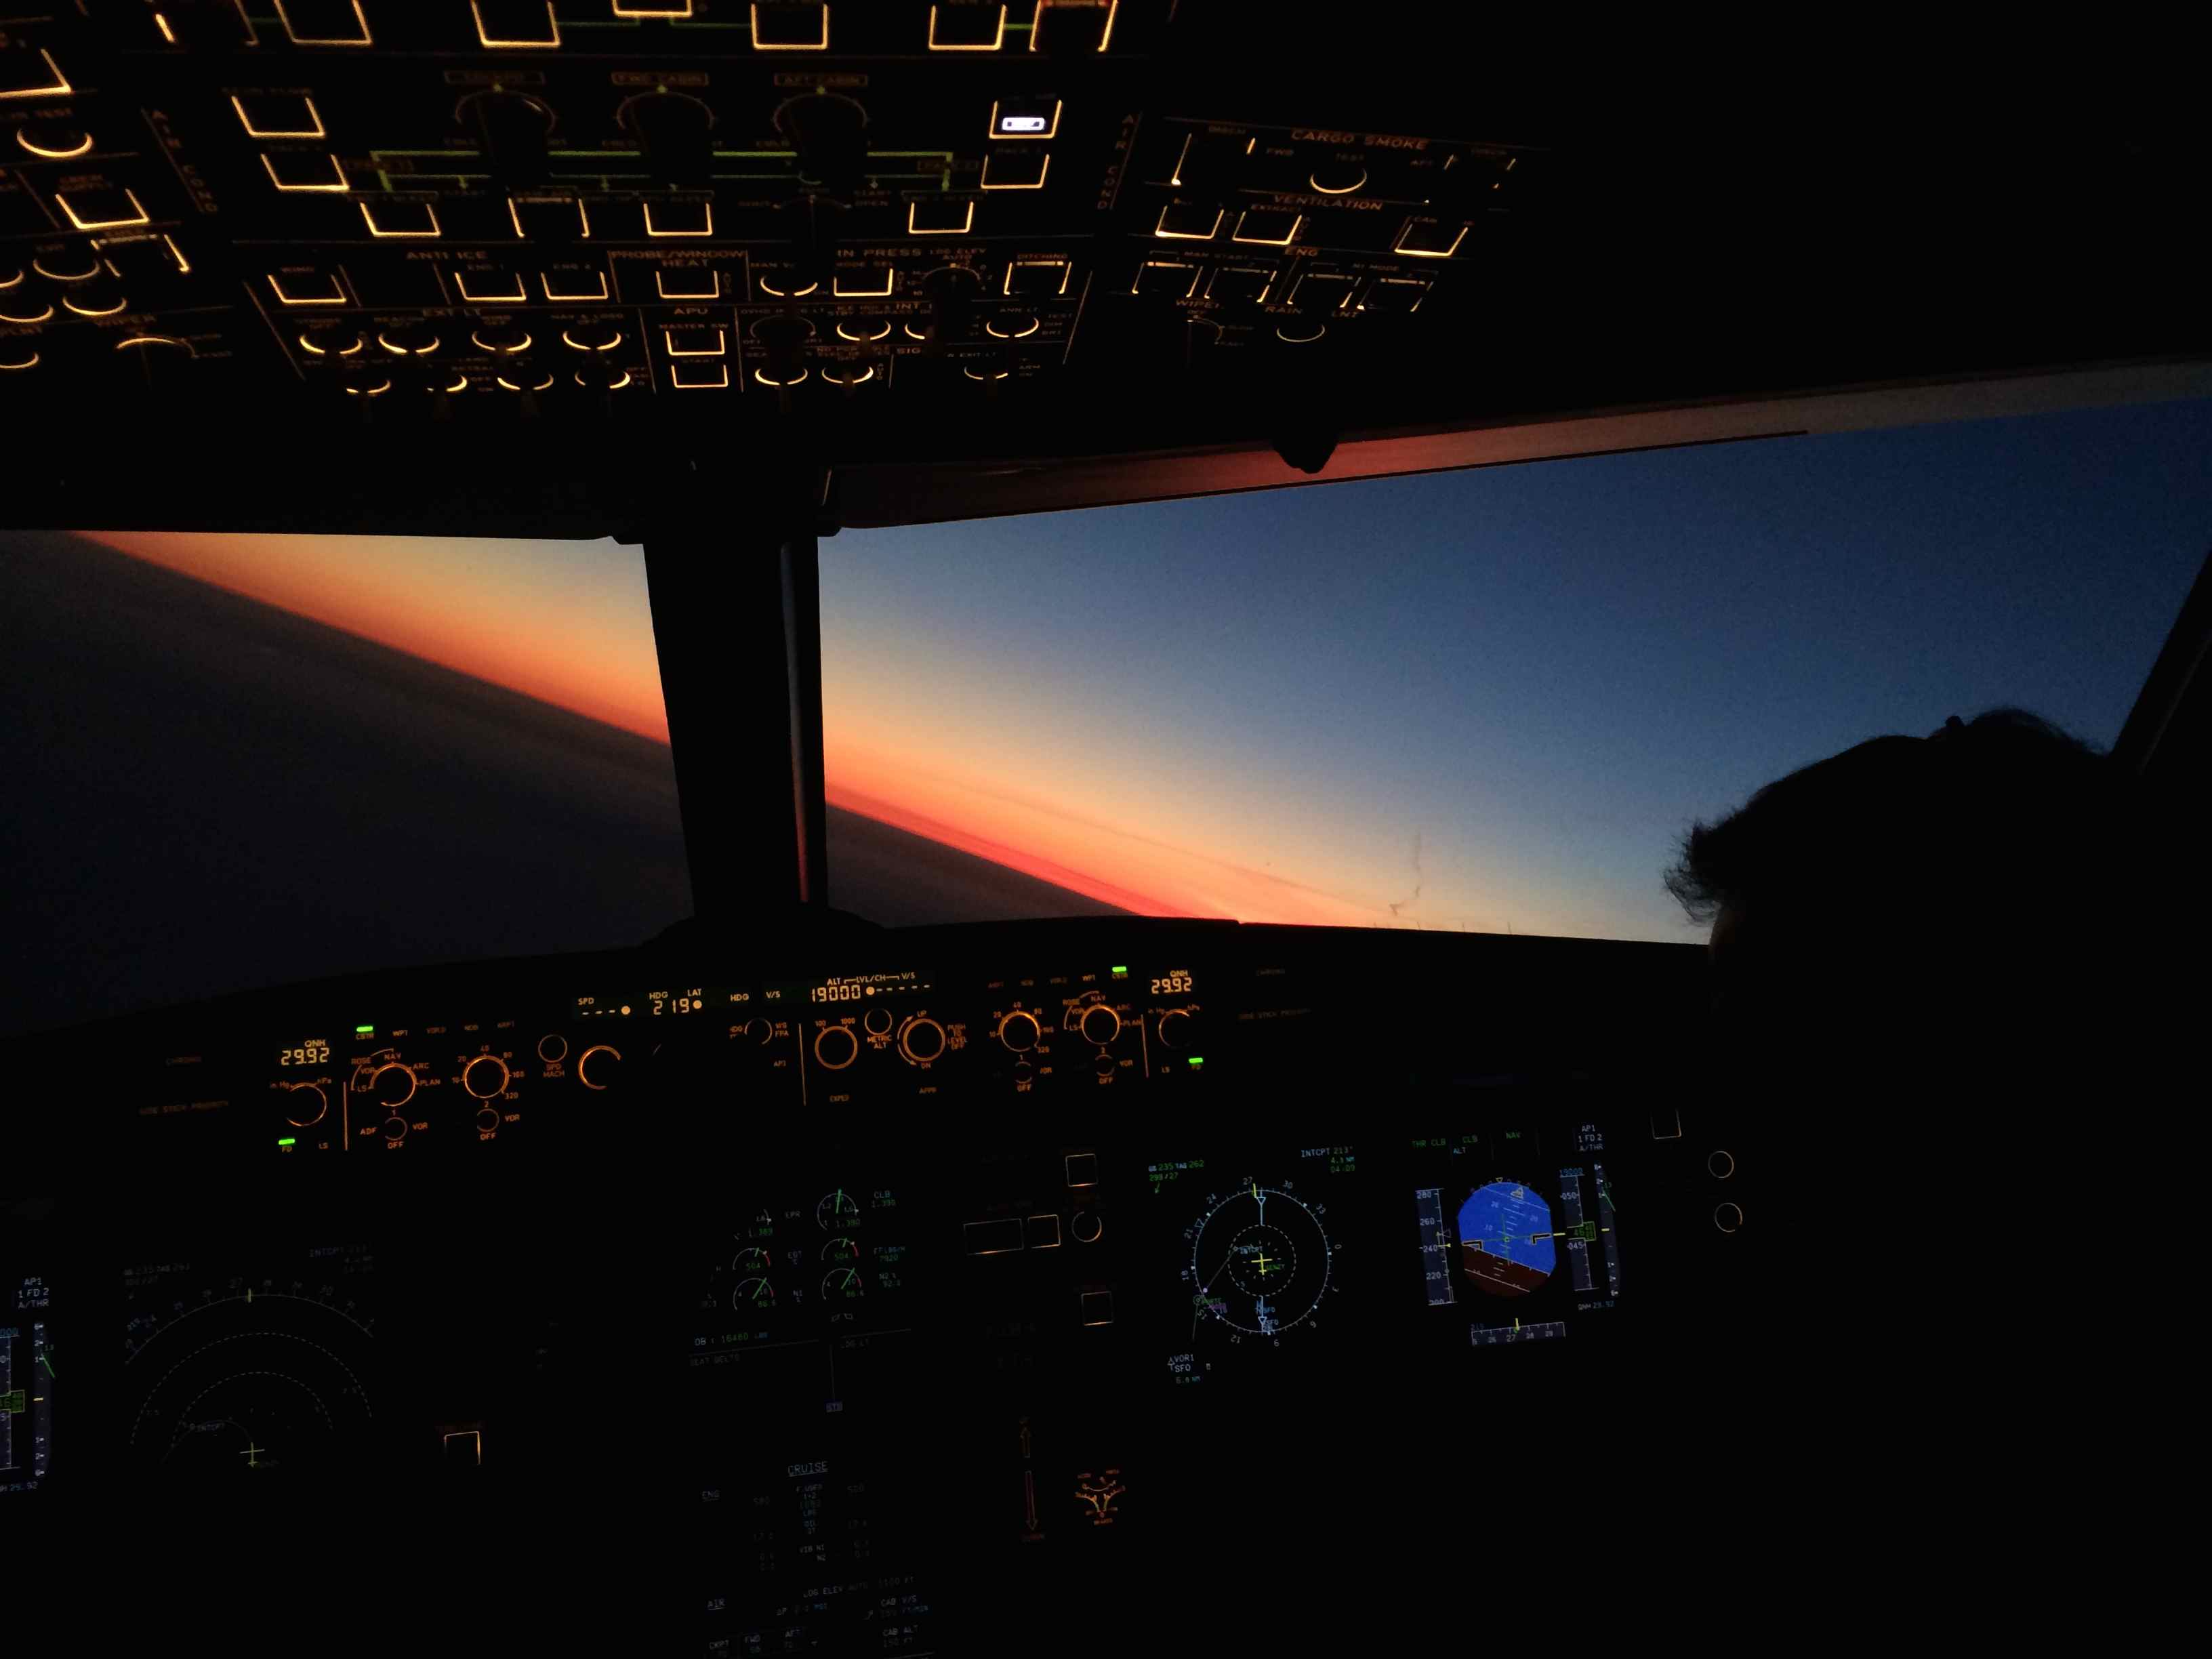 Climbing out of KSFO into a gorgeous sunset.